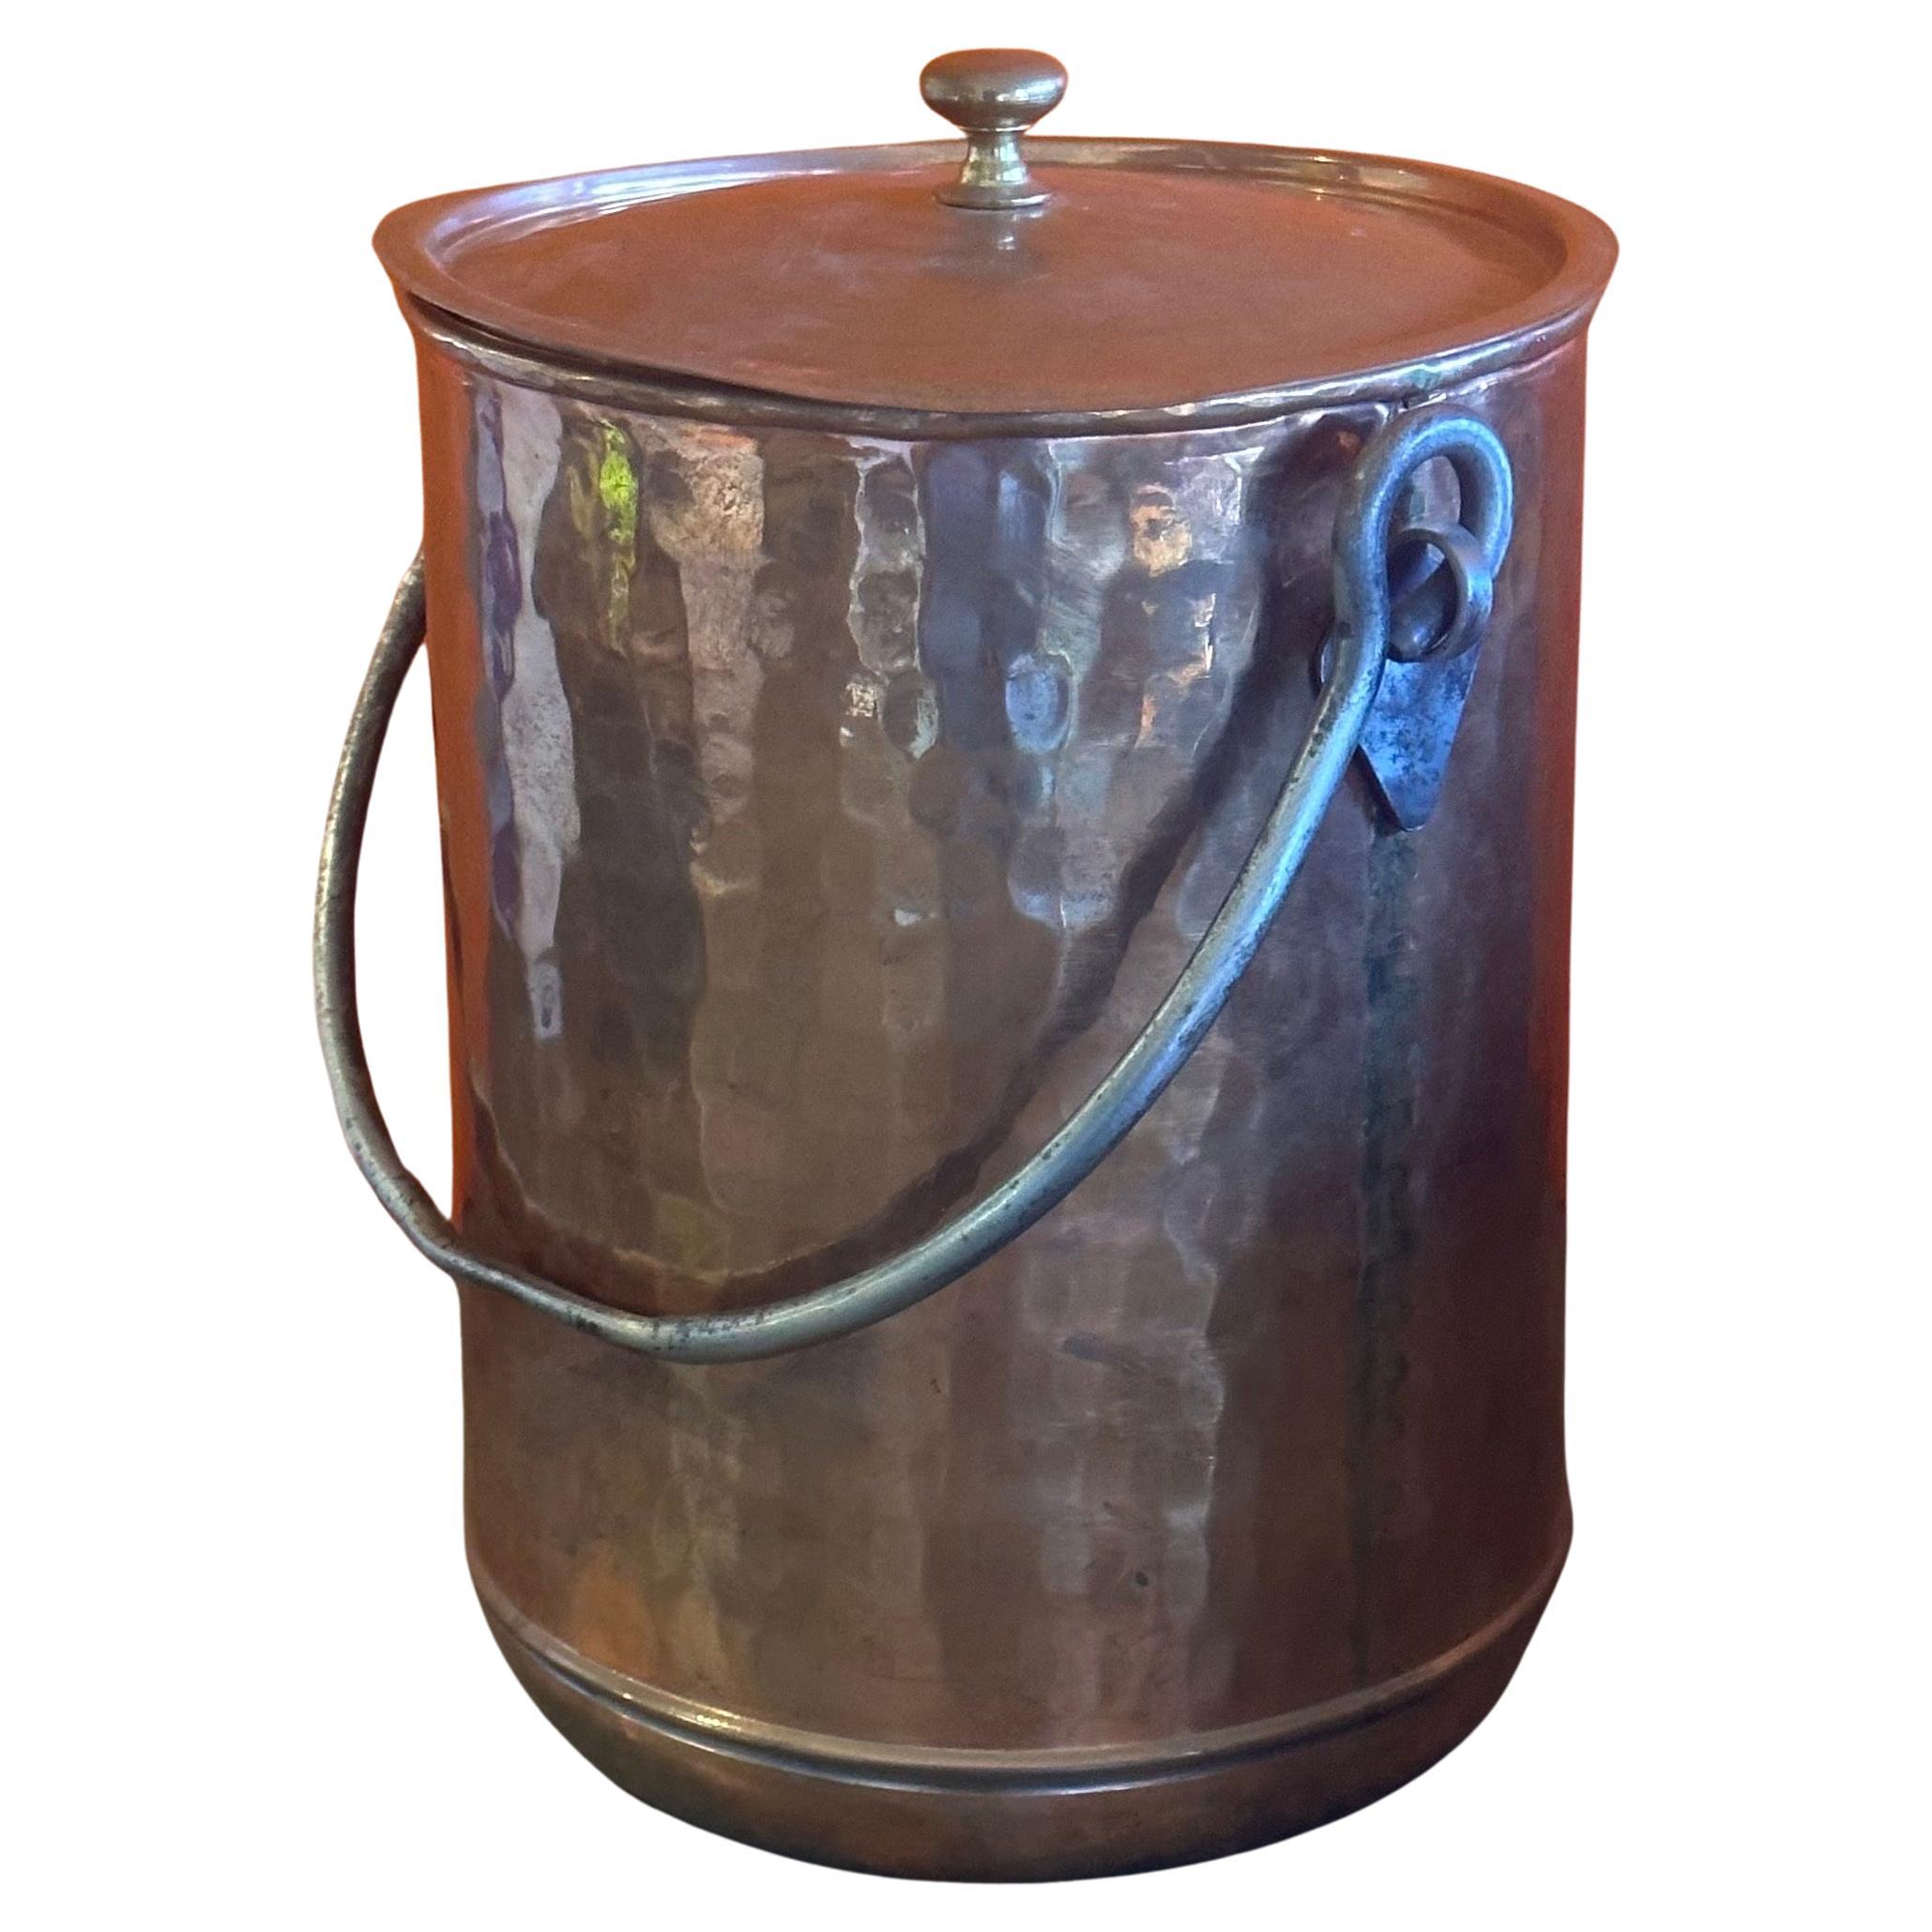 A very nice Arts & Crafts style hand hammered copper ice bucket with lid, circa 1940s. The piece is in very good condition and measures 8